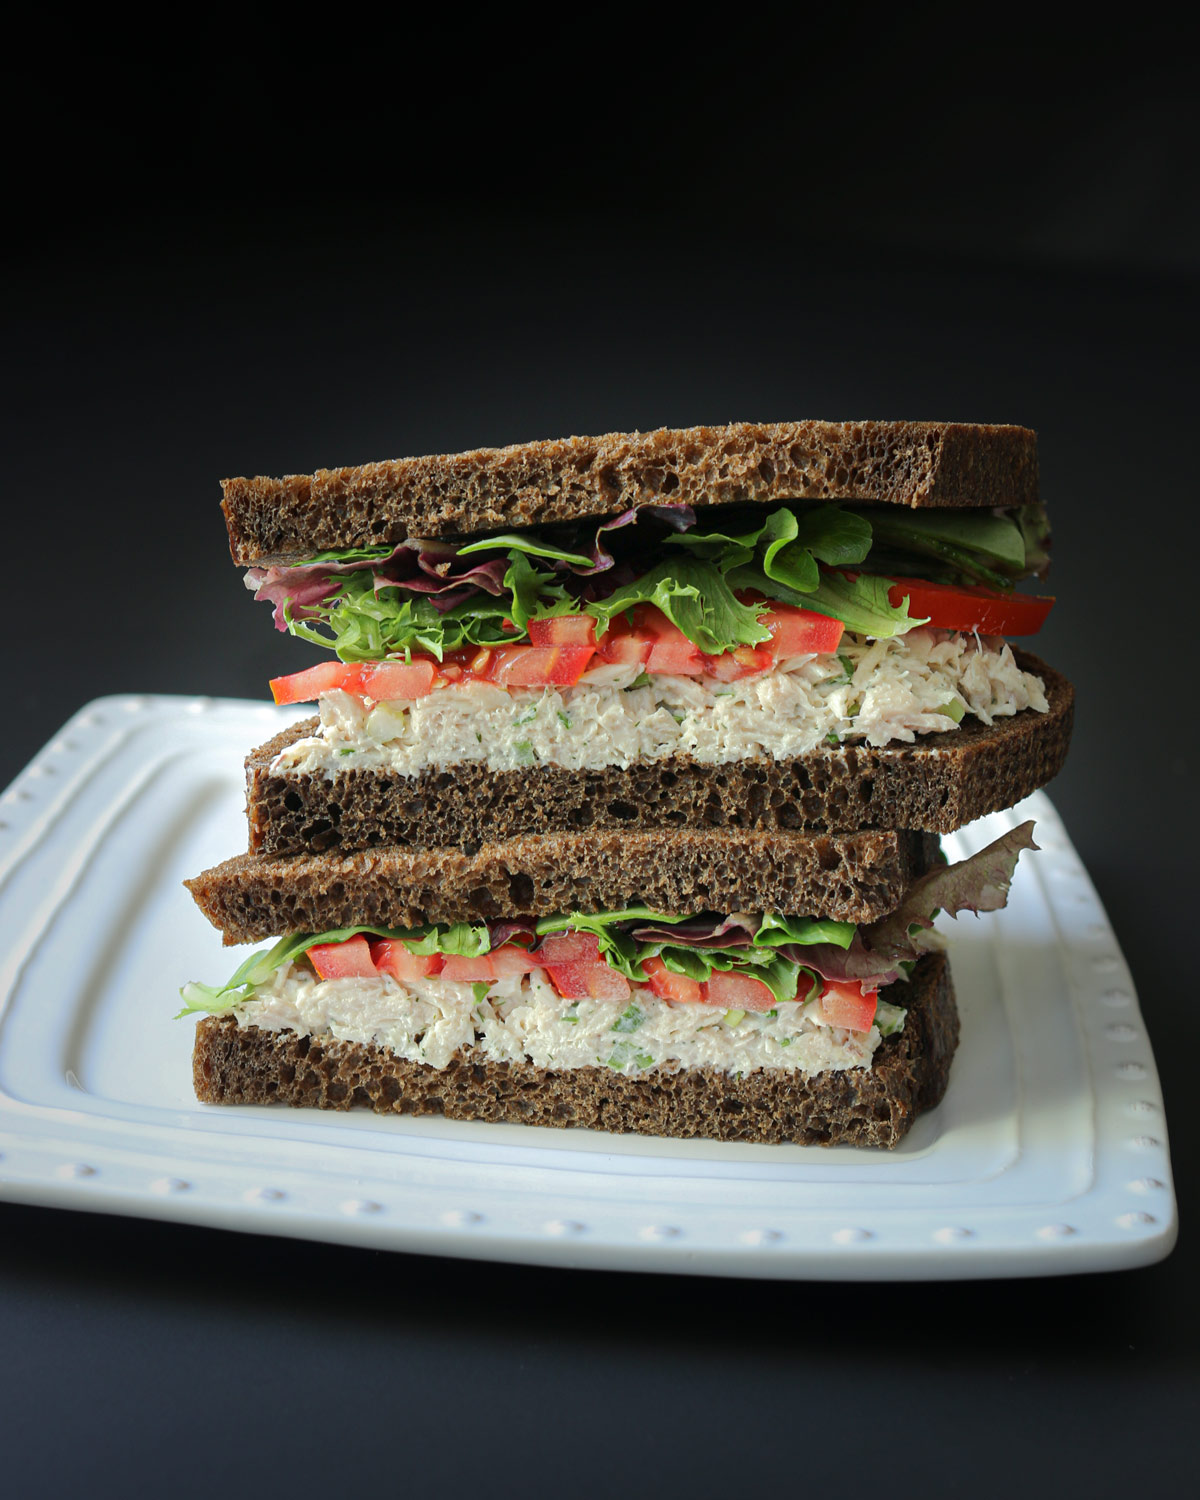 halves of tuna sandwich on pumpernickel bread, cut and stacked on a plate.